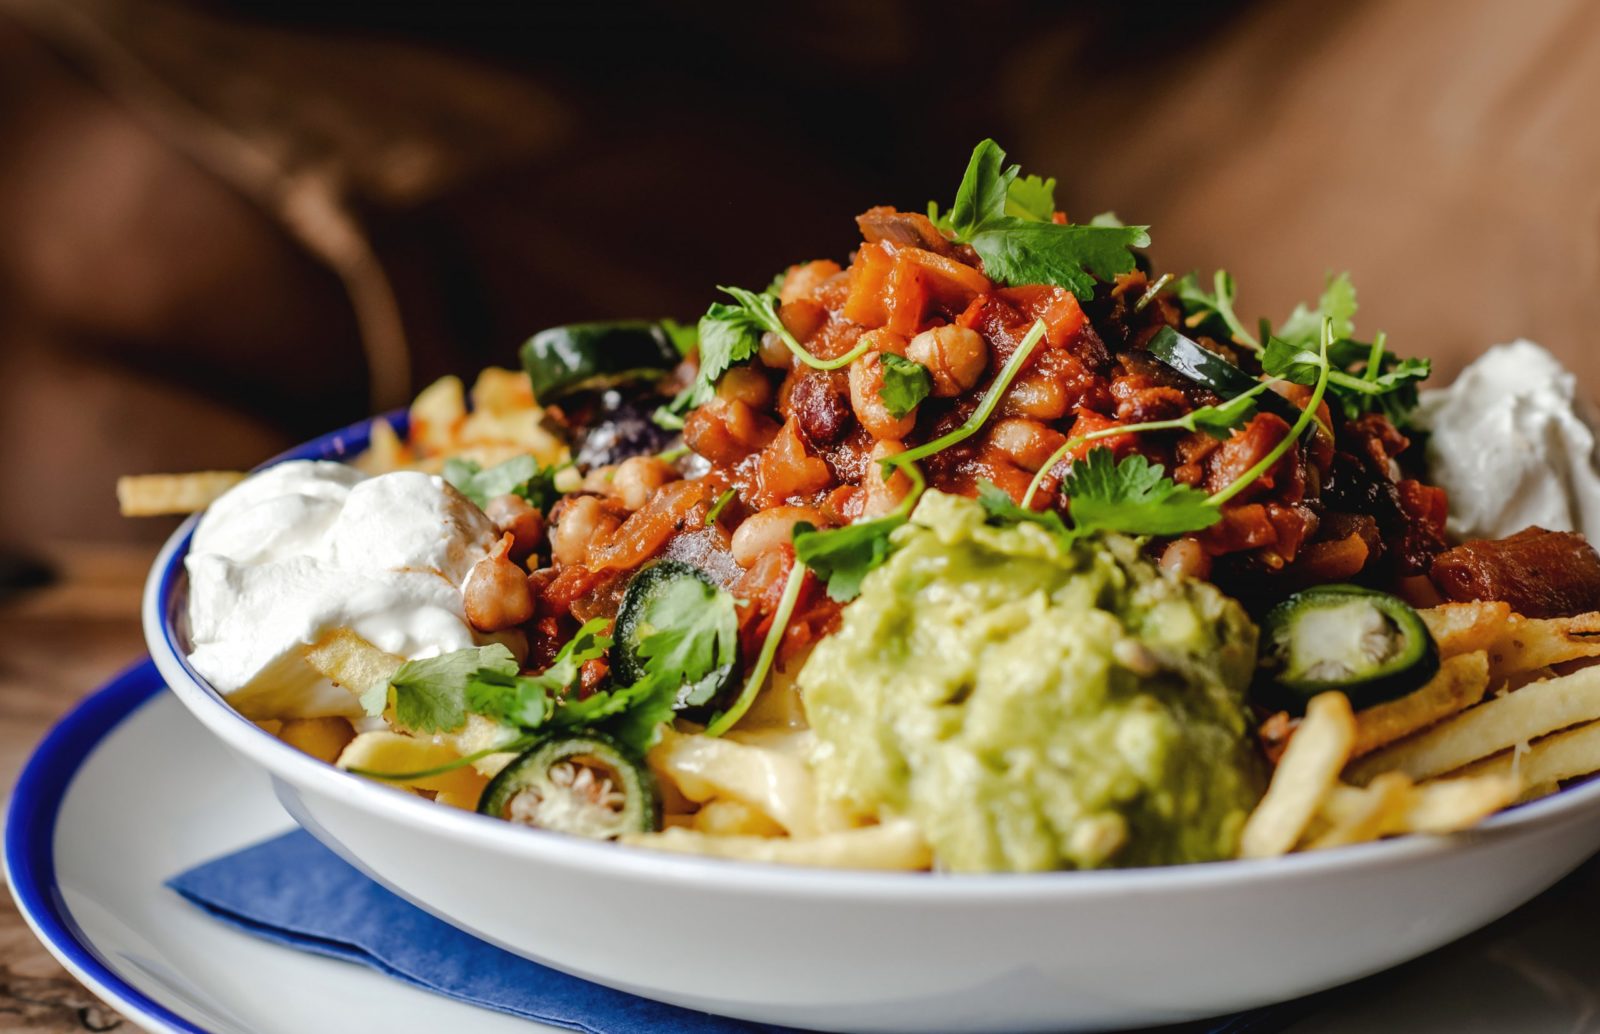 Cheesy fries topped with three bean chilli, guacamole, sour cream, jalapenos, and chipotle chilliflakes